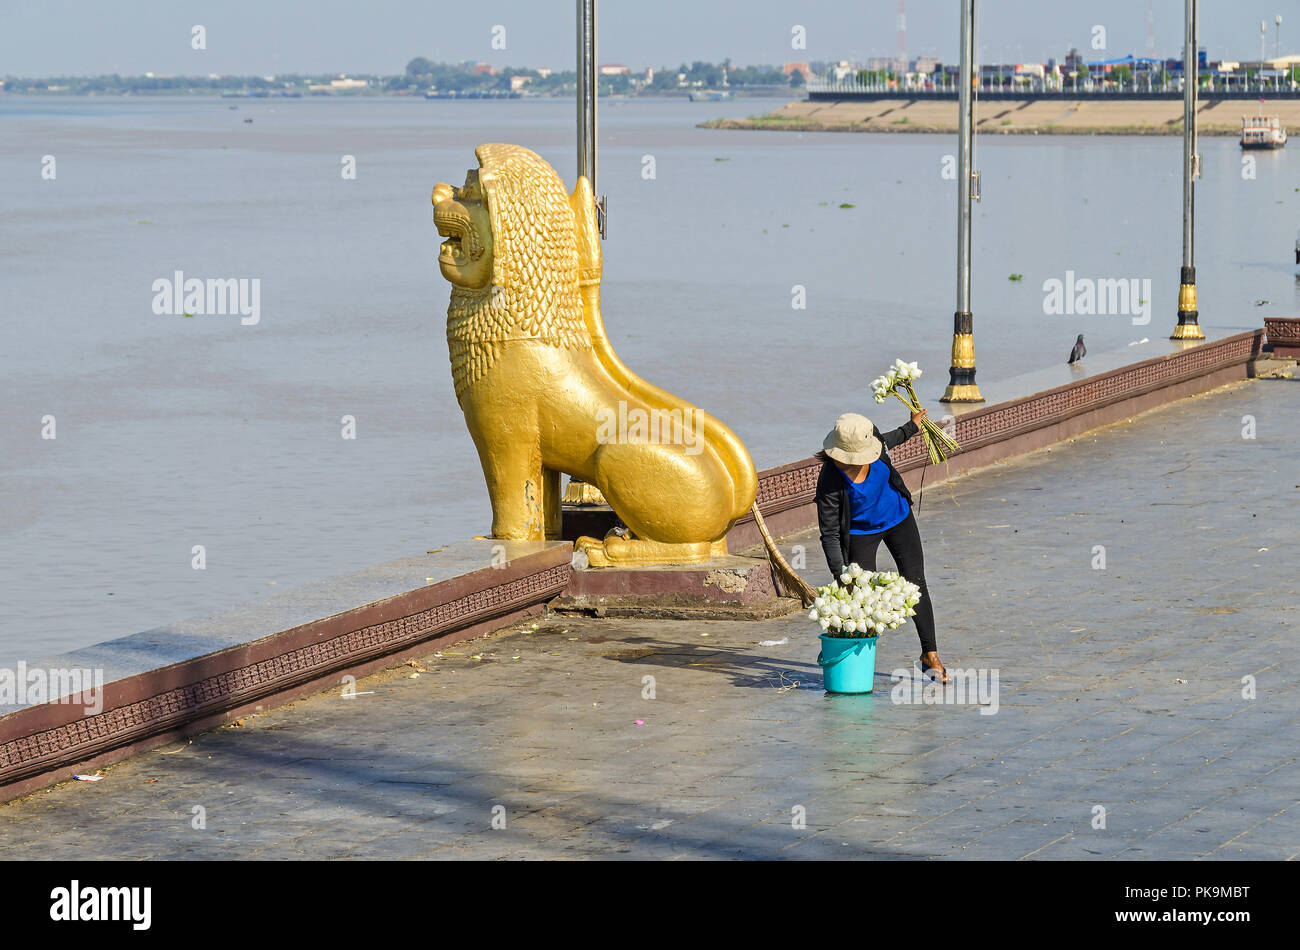 Phnom Penh, Cambodia - April 9, 2018: Preah Sisowath Quay, a riverside public promenade along the banks of the Mekong and Tonle Sap rivers with a guar Stock Photo